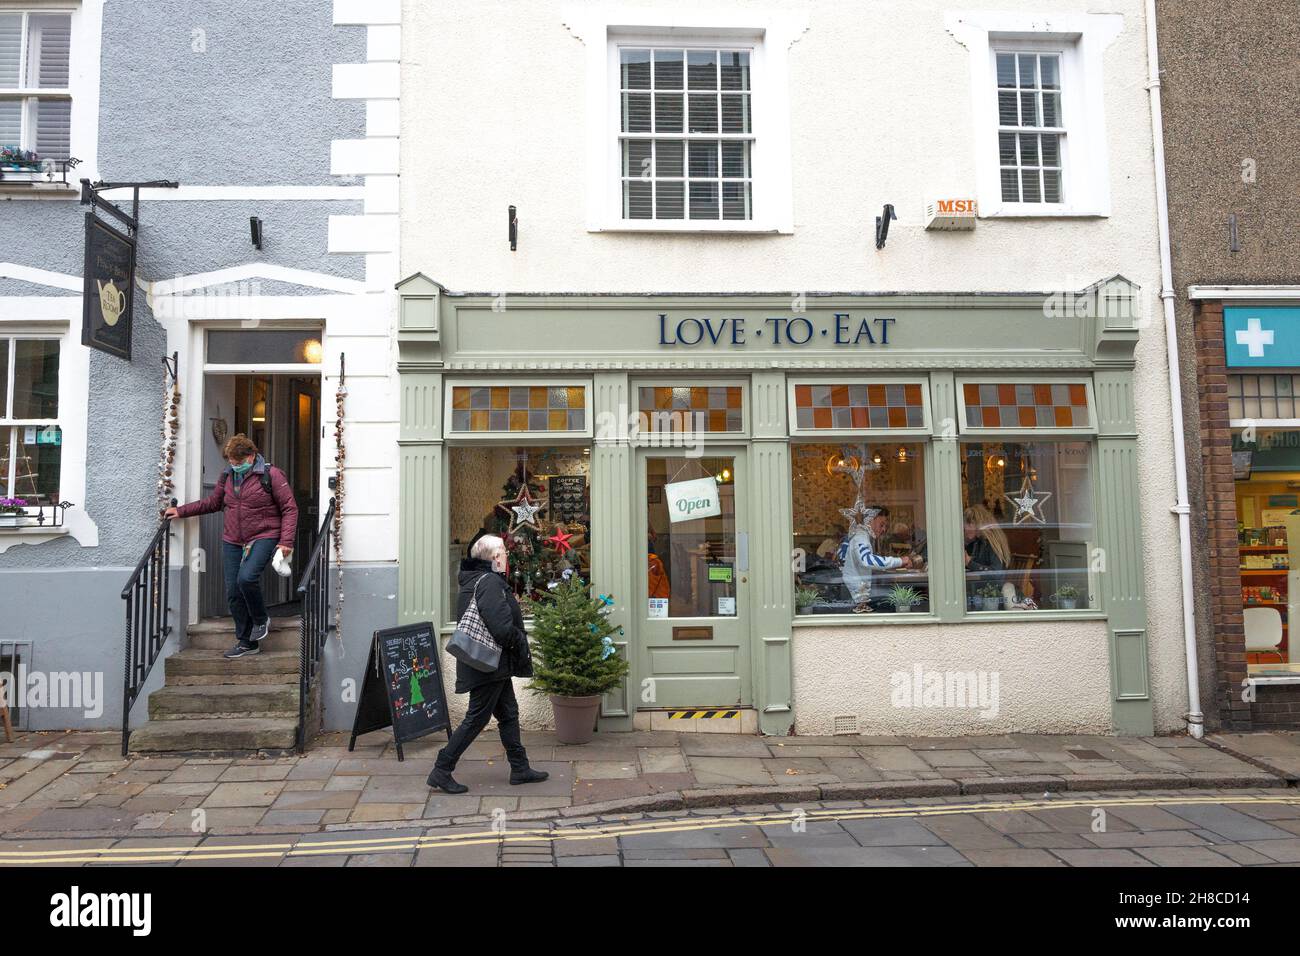 Customers inside Love to eat restaurant in Conwy, Wales. Stock Photo